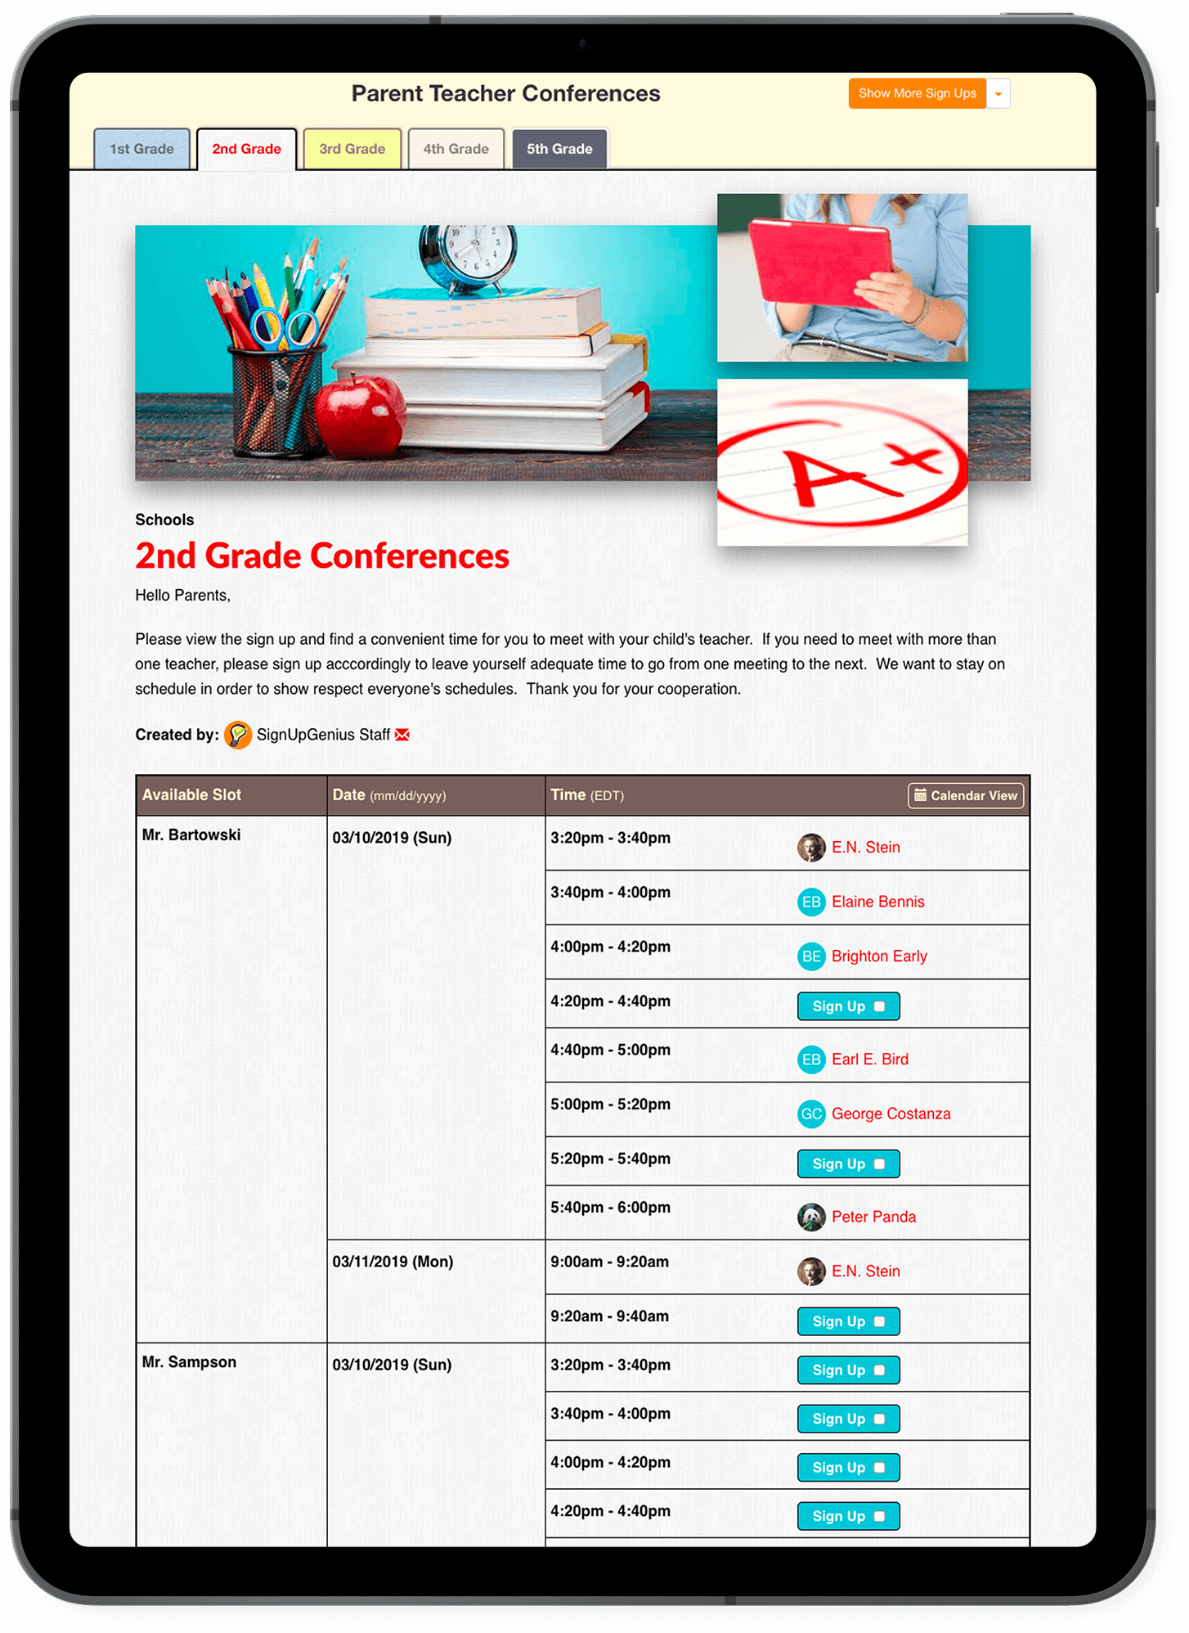 Parent Teacher Conference Sign Up on iPad